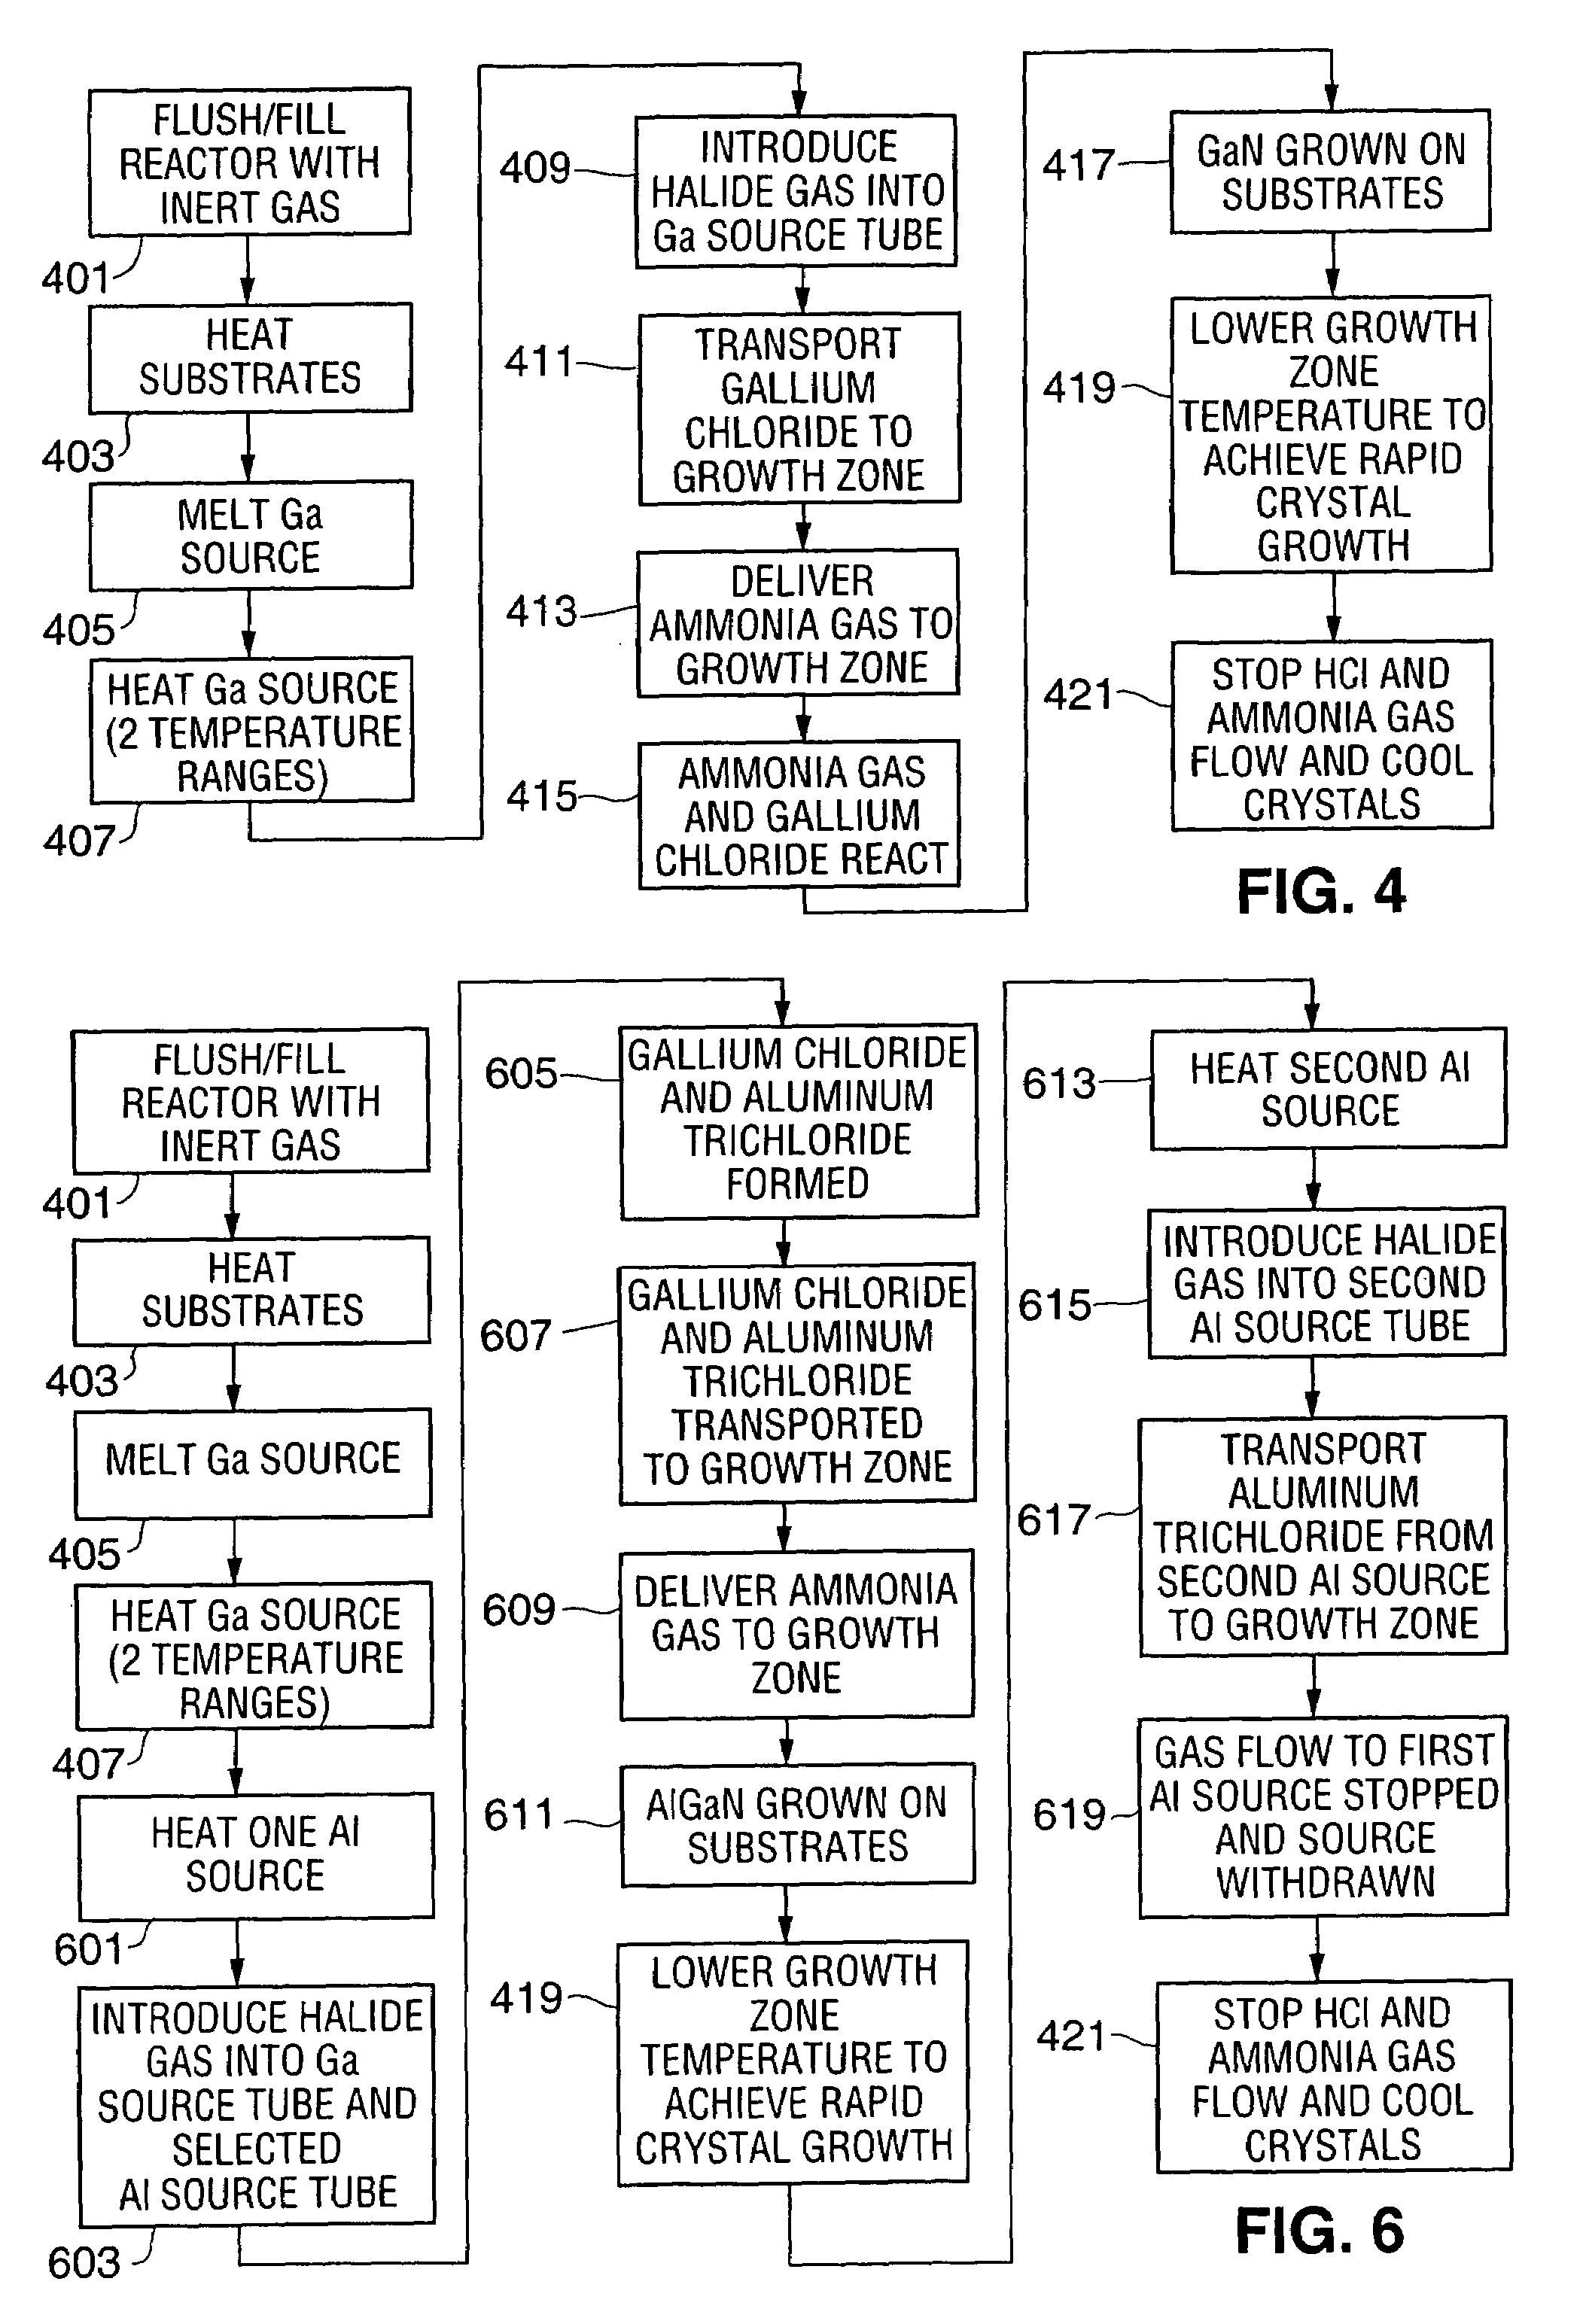 Reactor for extended duration growth of gallium containing single crystals